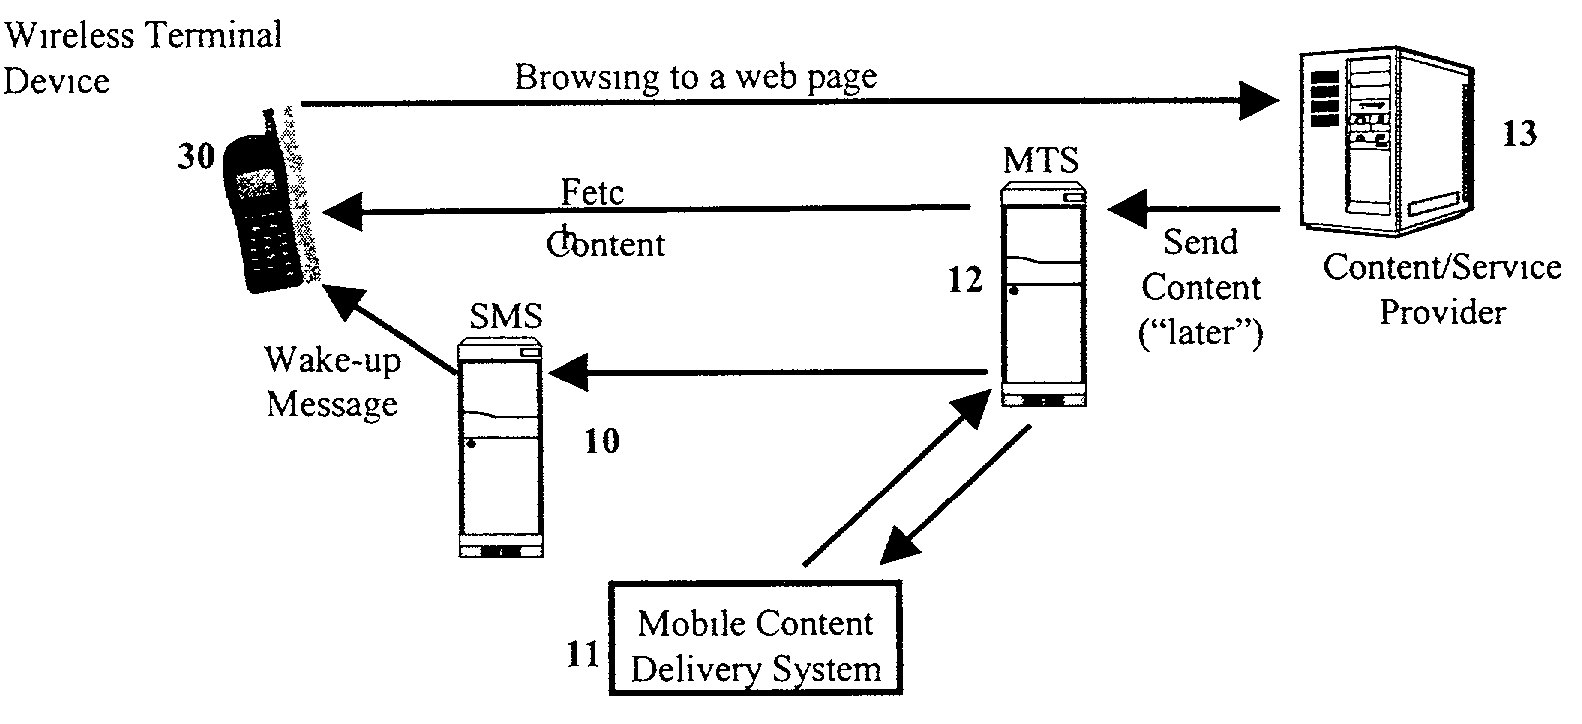 Mobile content delivery system